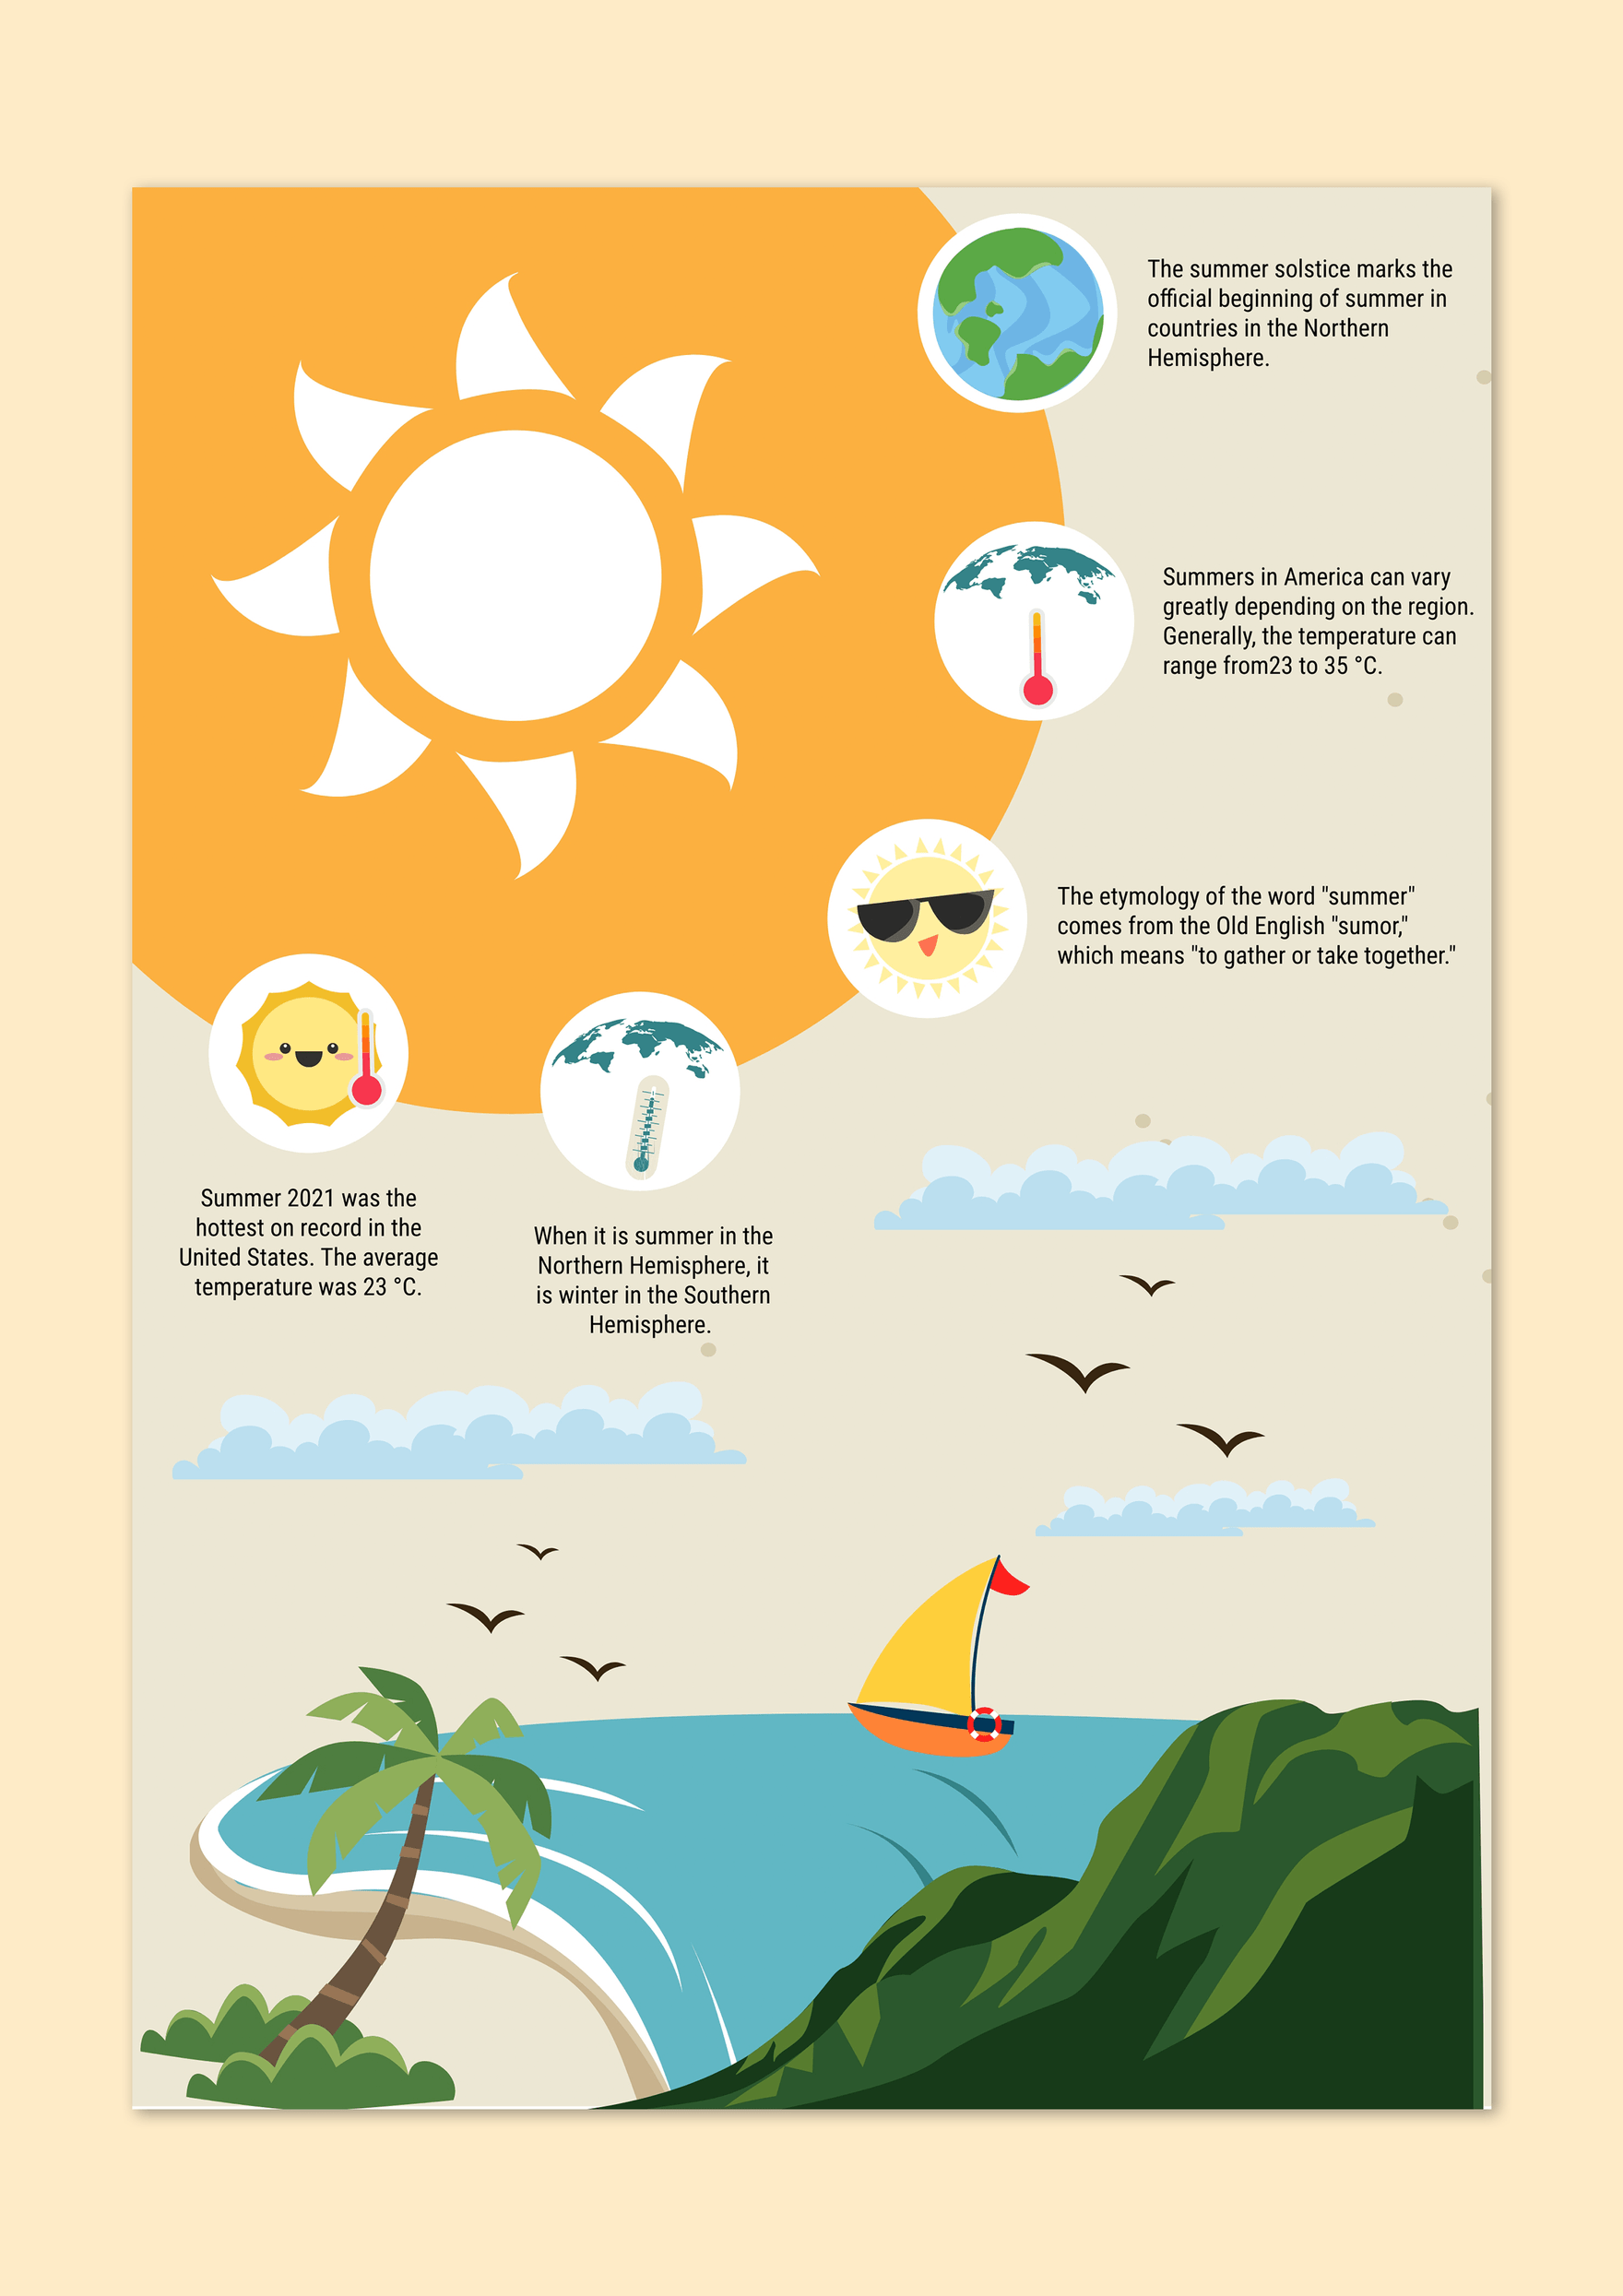 Summer Infographic